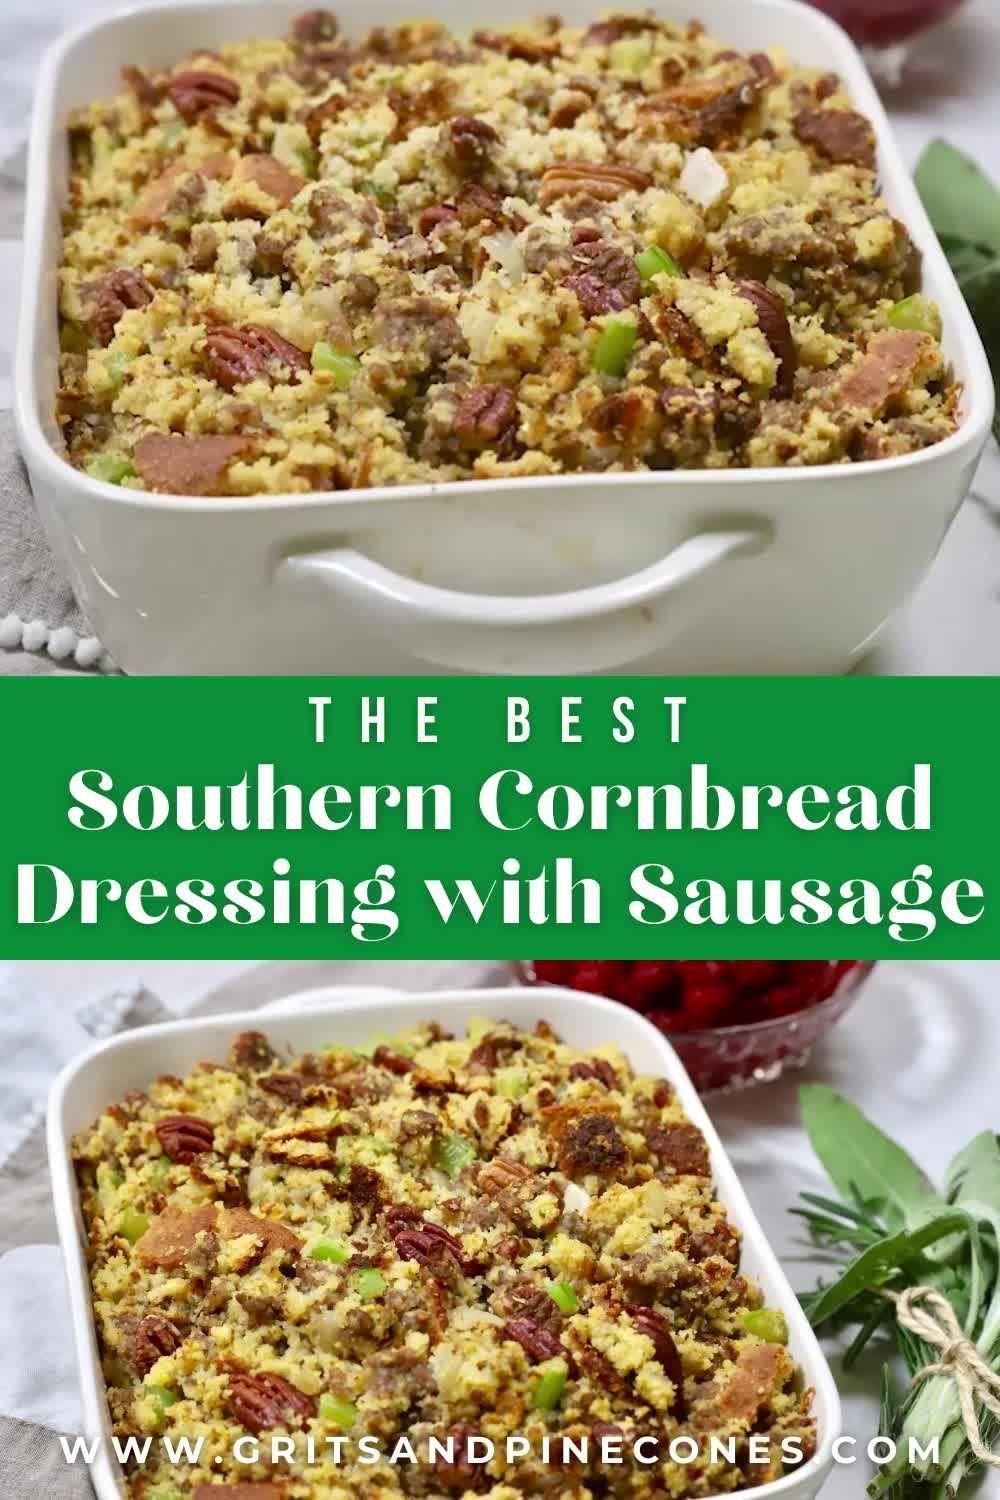 Cornbread Dressing with Sausage and Pecans Recipe Thanksgiving Side Dish | gritsandpinecones.com -   25 dressing recipes cornbread southern videos ideas